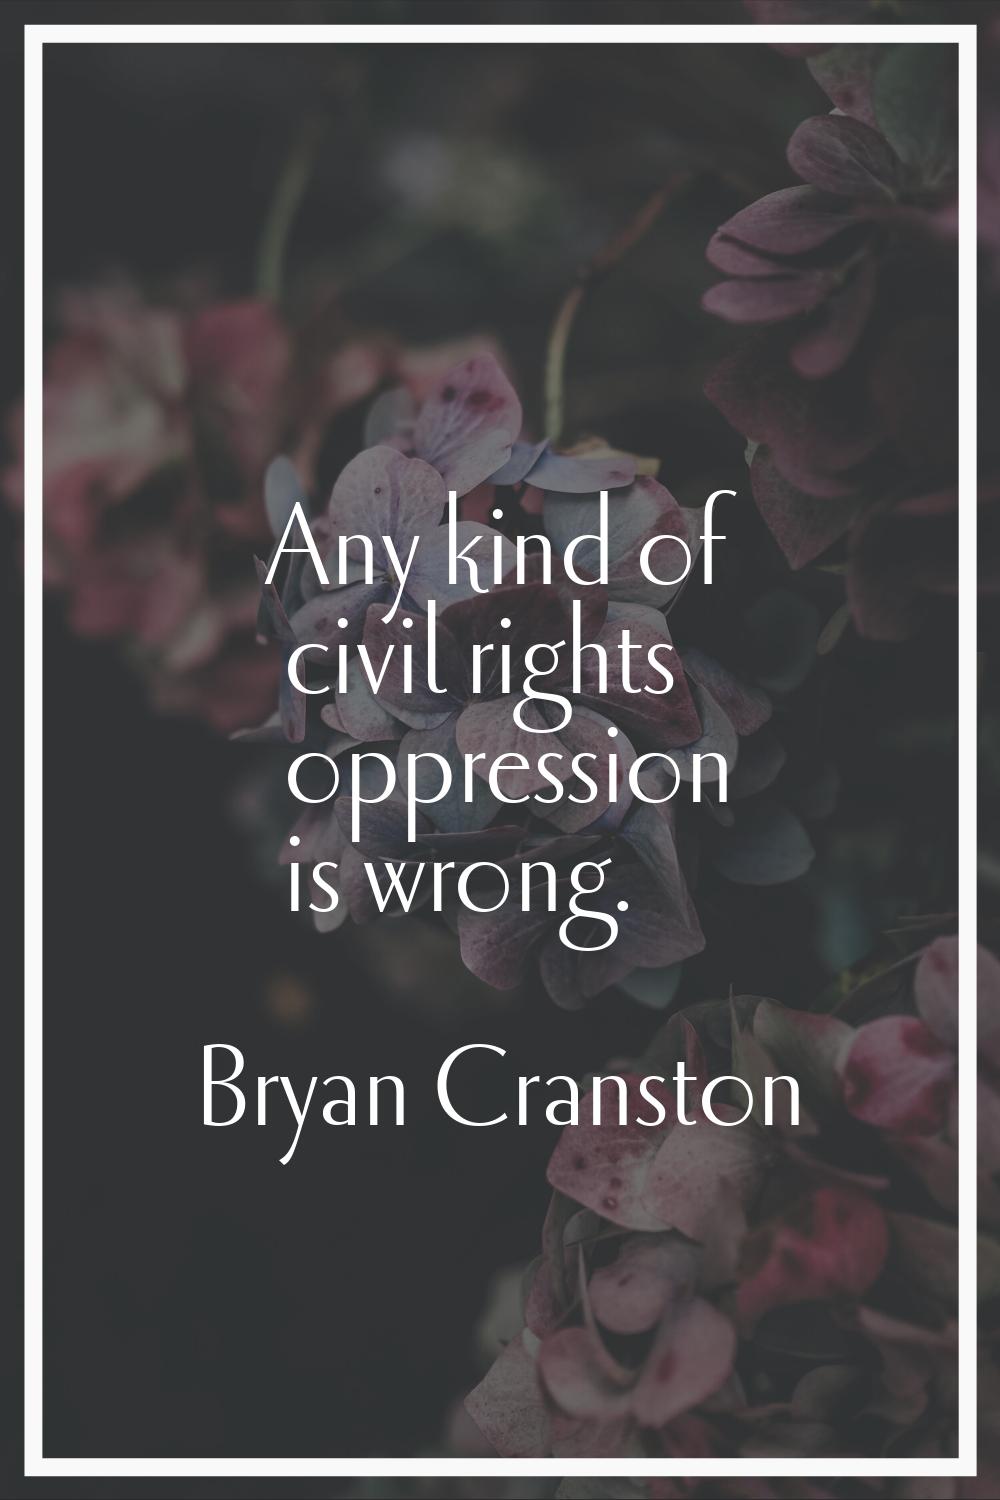 Any kind of civil rights oppression is wrong.